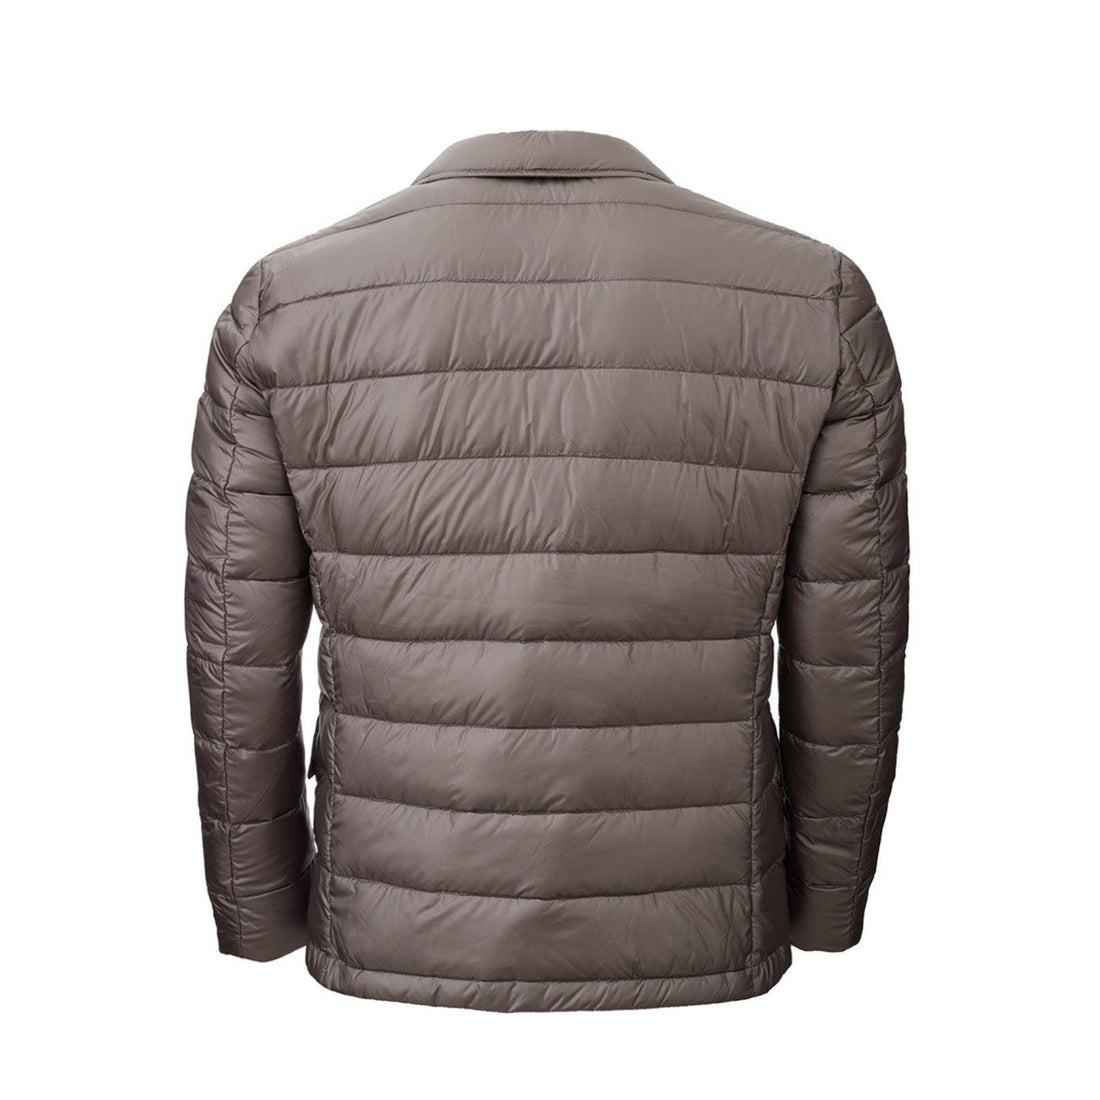 Add Elegant Dove Grey Quilted Jacket